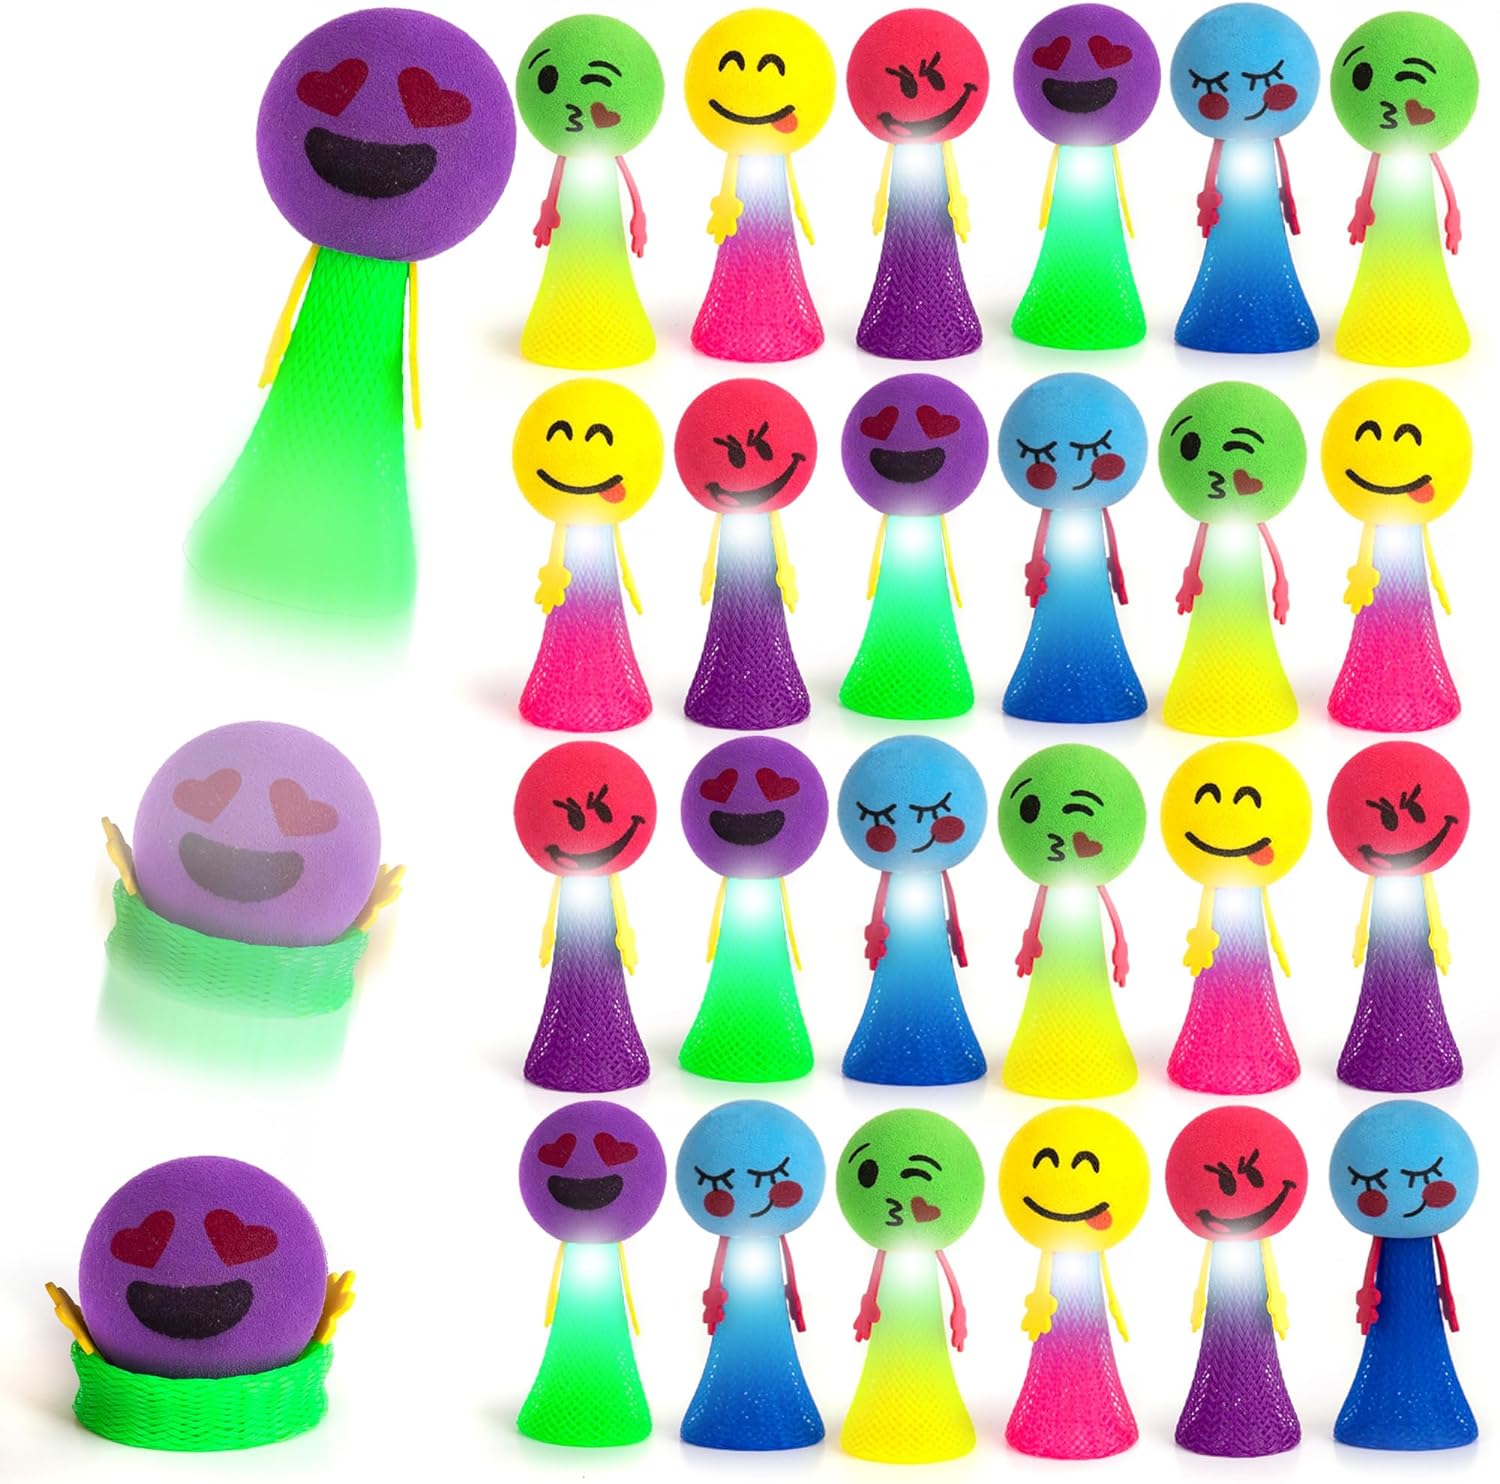 ArtCreativity Set of 24 Jumping Emoji Spring Launcher Toys, Light Up Bouncy Toy Party Poppers with Flashing LED Lights, Pop Up to 4 Feet High, Light Up Party Favors, Goodie Bag Fillers for Kids